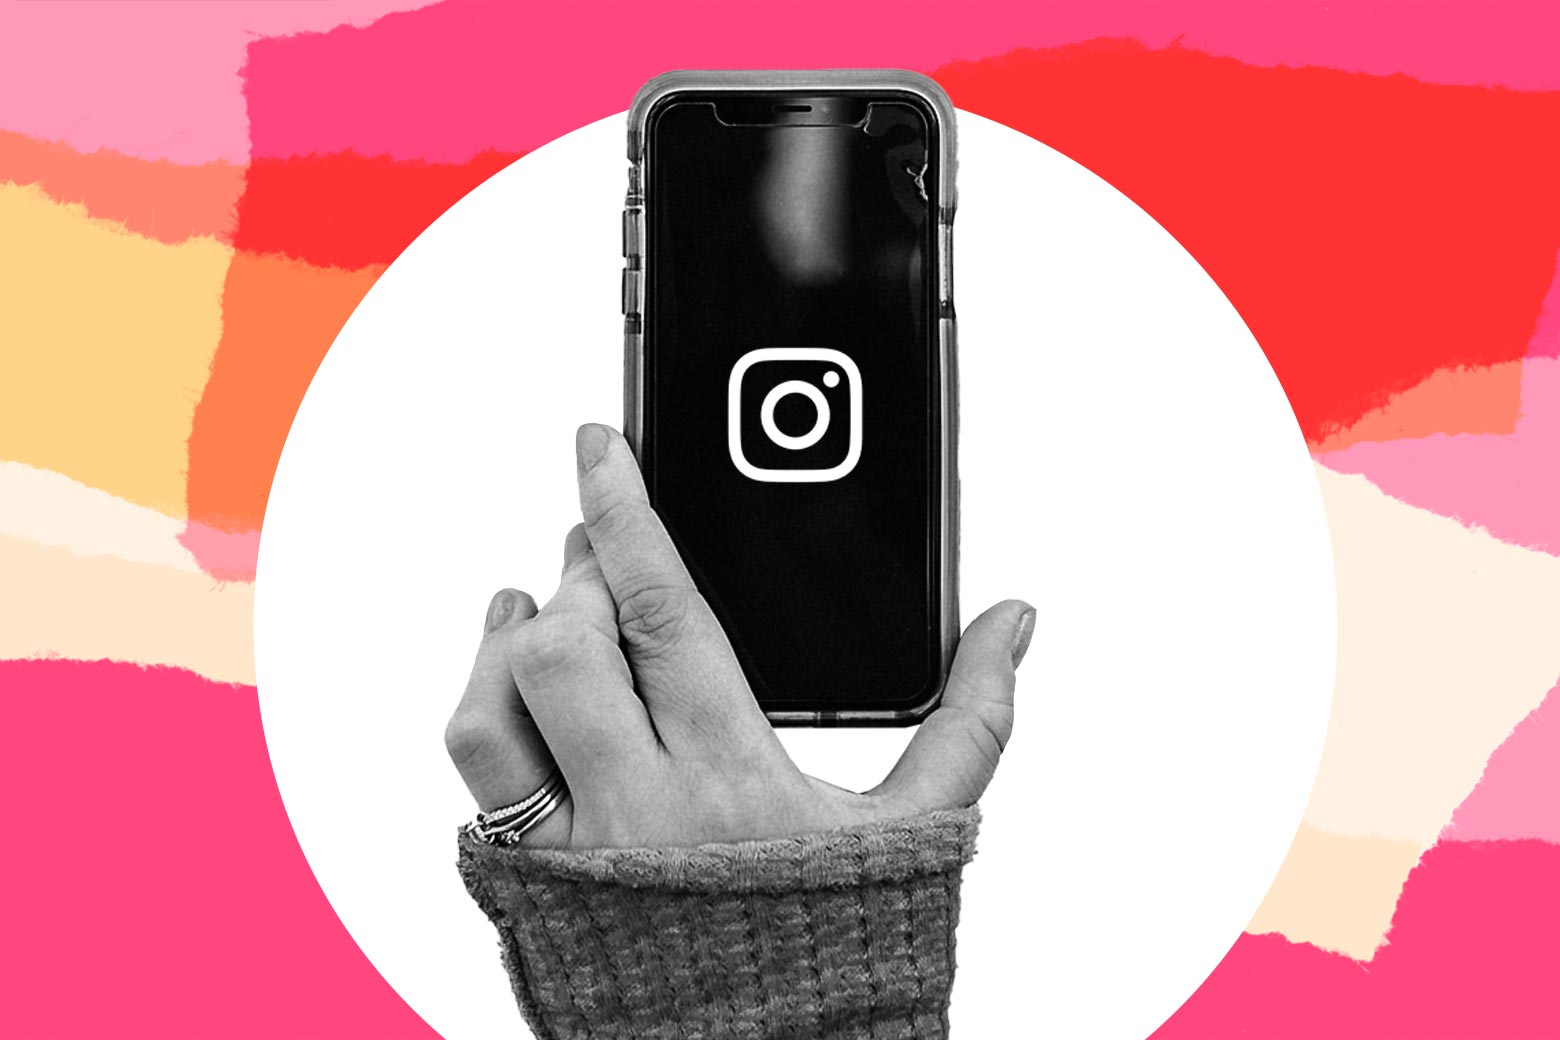 A hand holds a phone displaying the Instagram logo over a colored background.